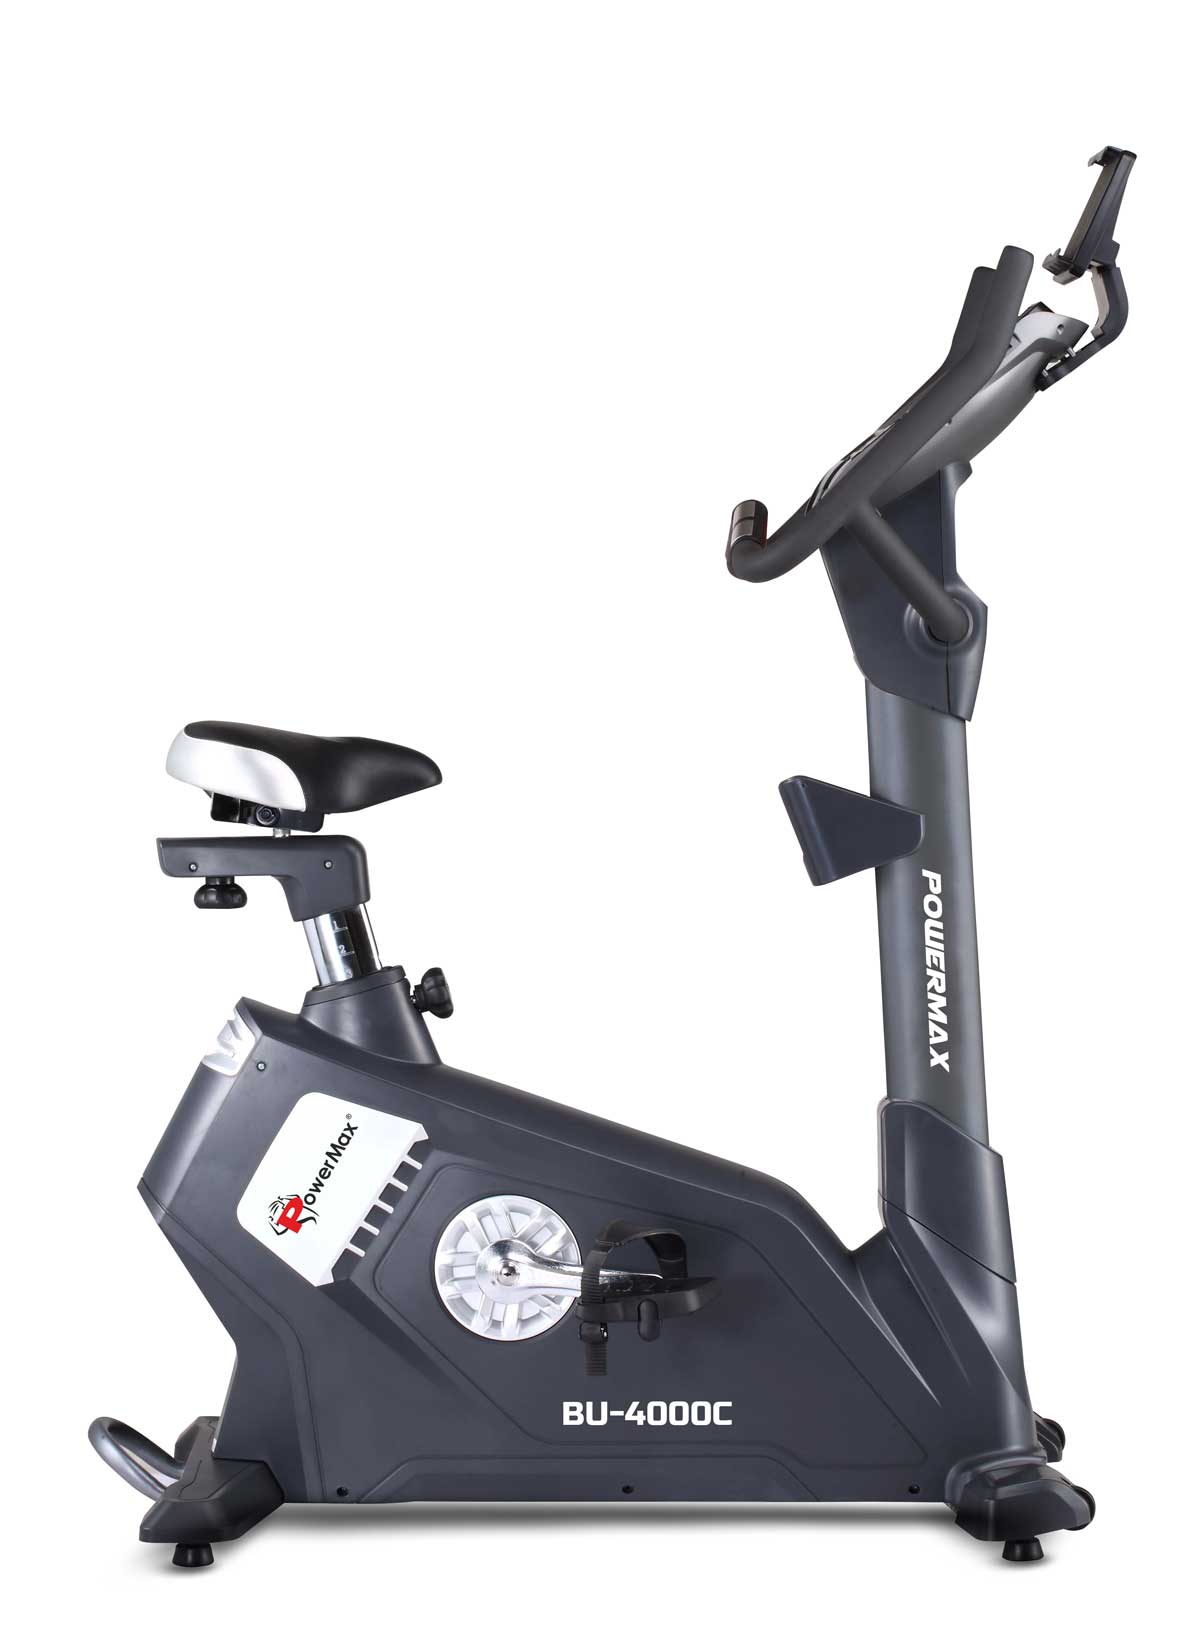 PowerMax Fitness BU-4000C Commercial Upright Exercise Bike with iPad holder